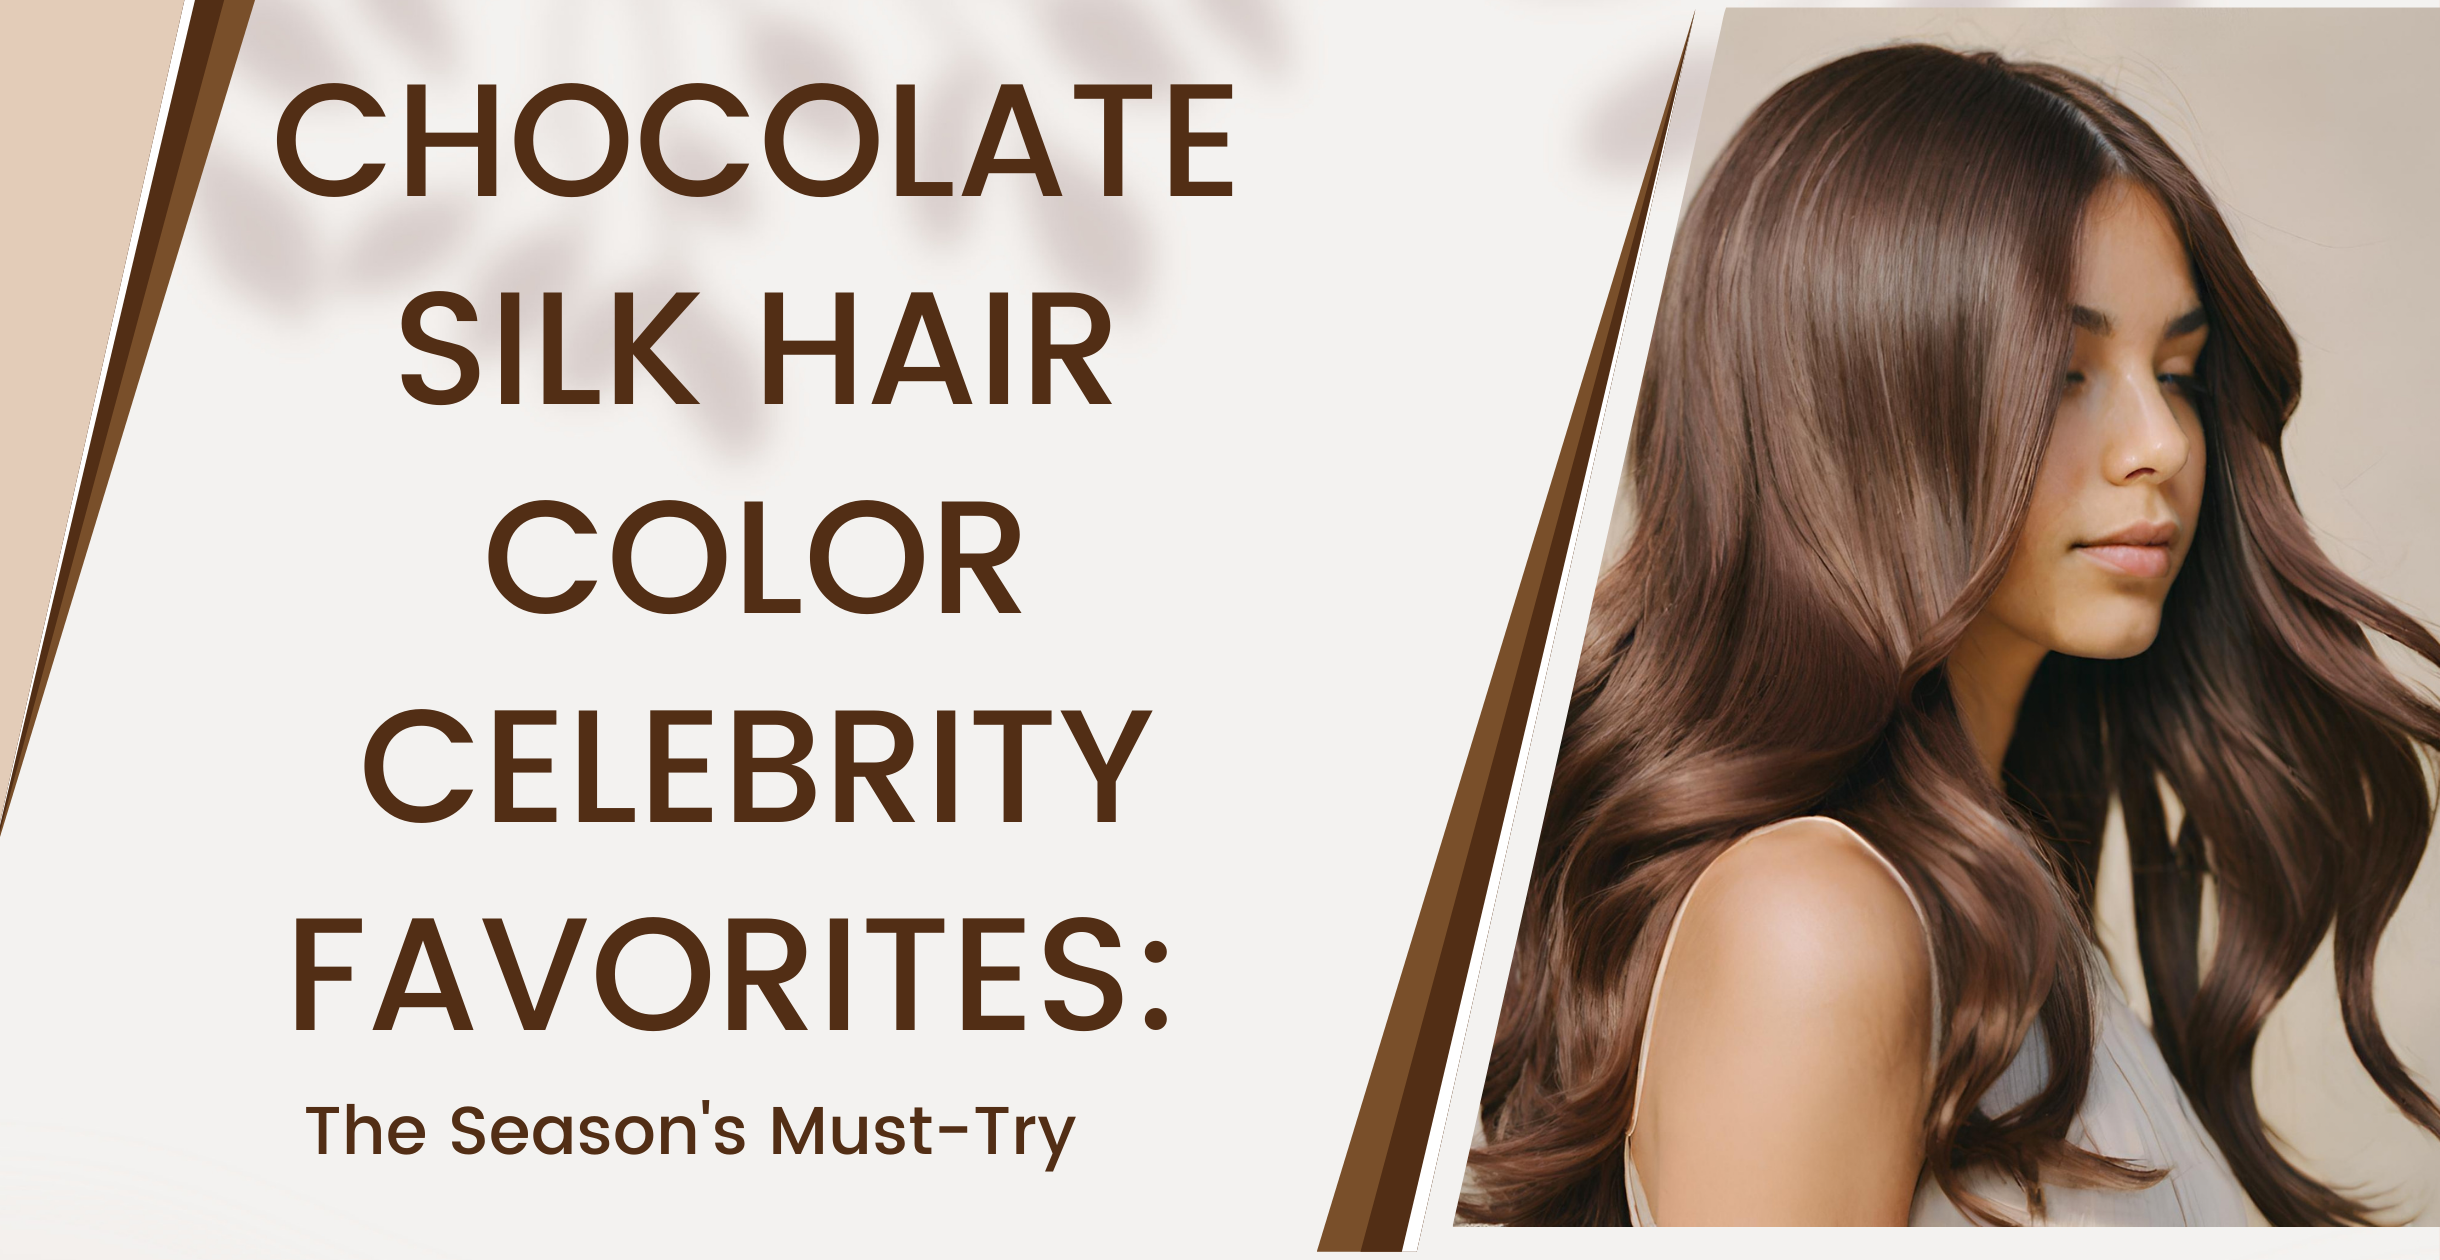 Chocolate Silk Hair Color Celebrity Favorites: The Season's Must-Try